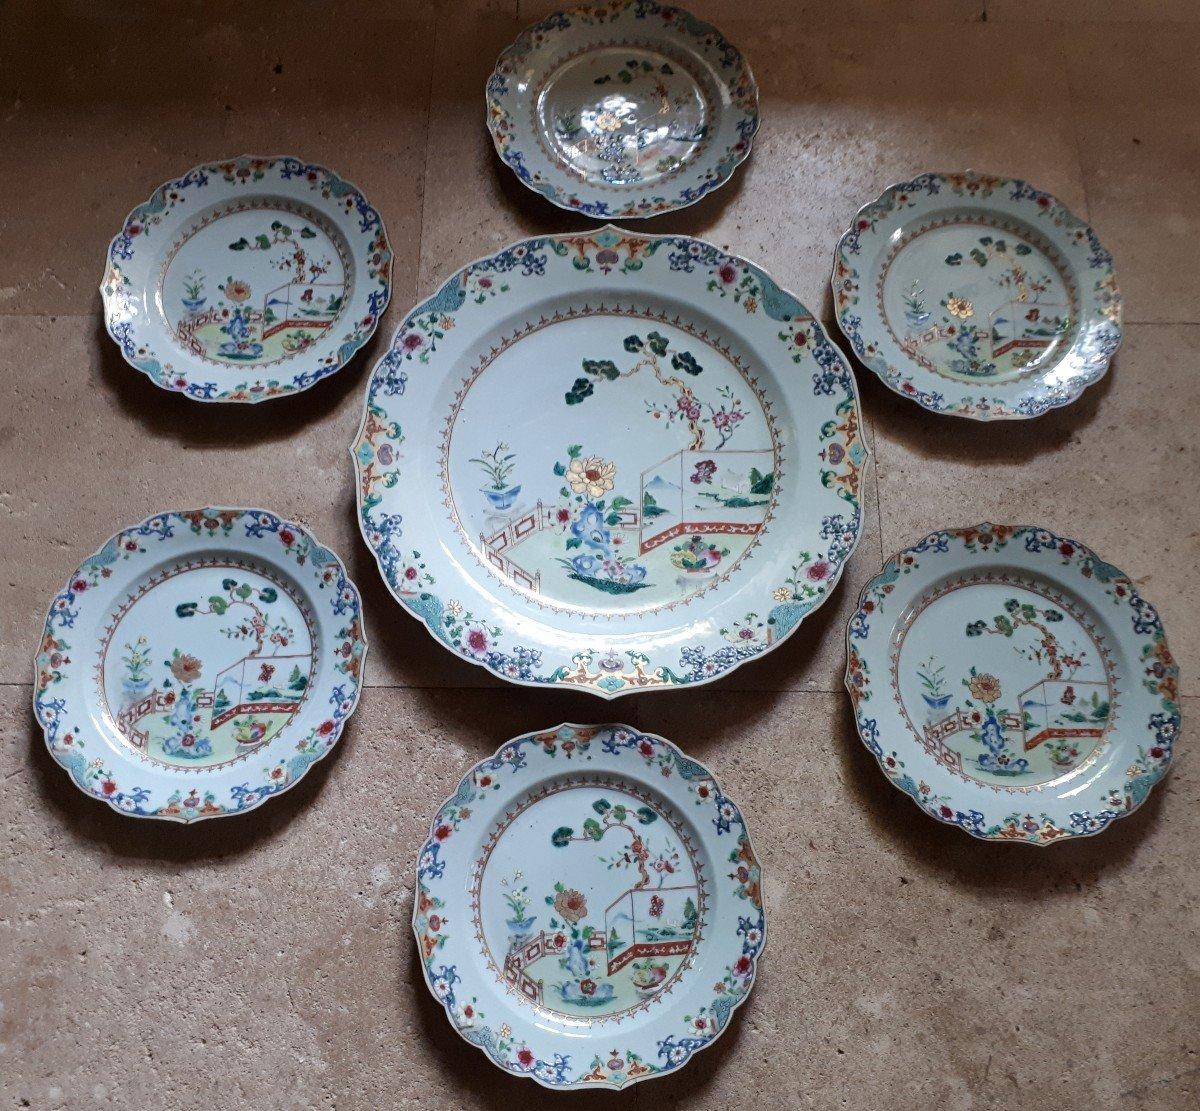 A dish and six scalloped plates in Famille rose porcelain with garden decorations. The dish is in perfect condition. Chips on the reverse of two plates. Dish diameter 38 cm, plates 23 cm. China, first half of the 18th century. Rare in this condition